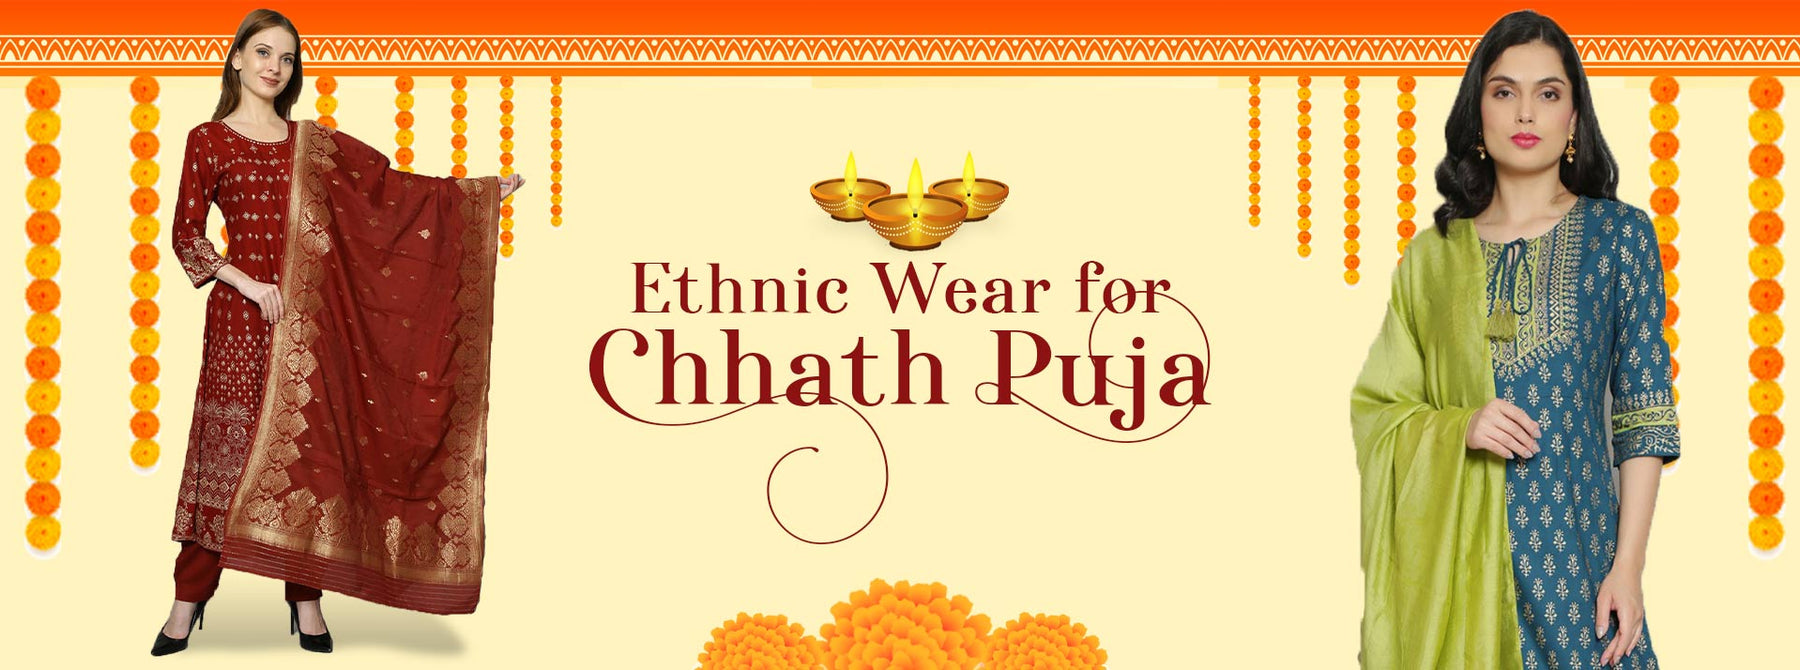 Chhat Puja – Celebrate A Flavorful Festival Wearing Beautiful Outfits from Shree